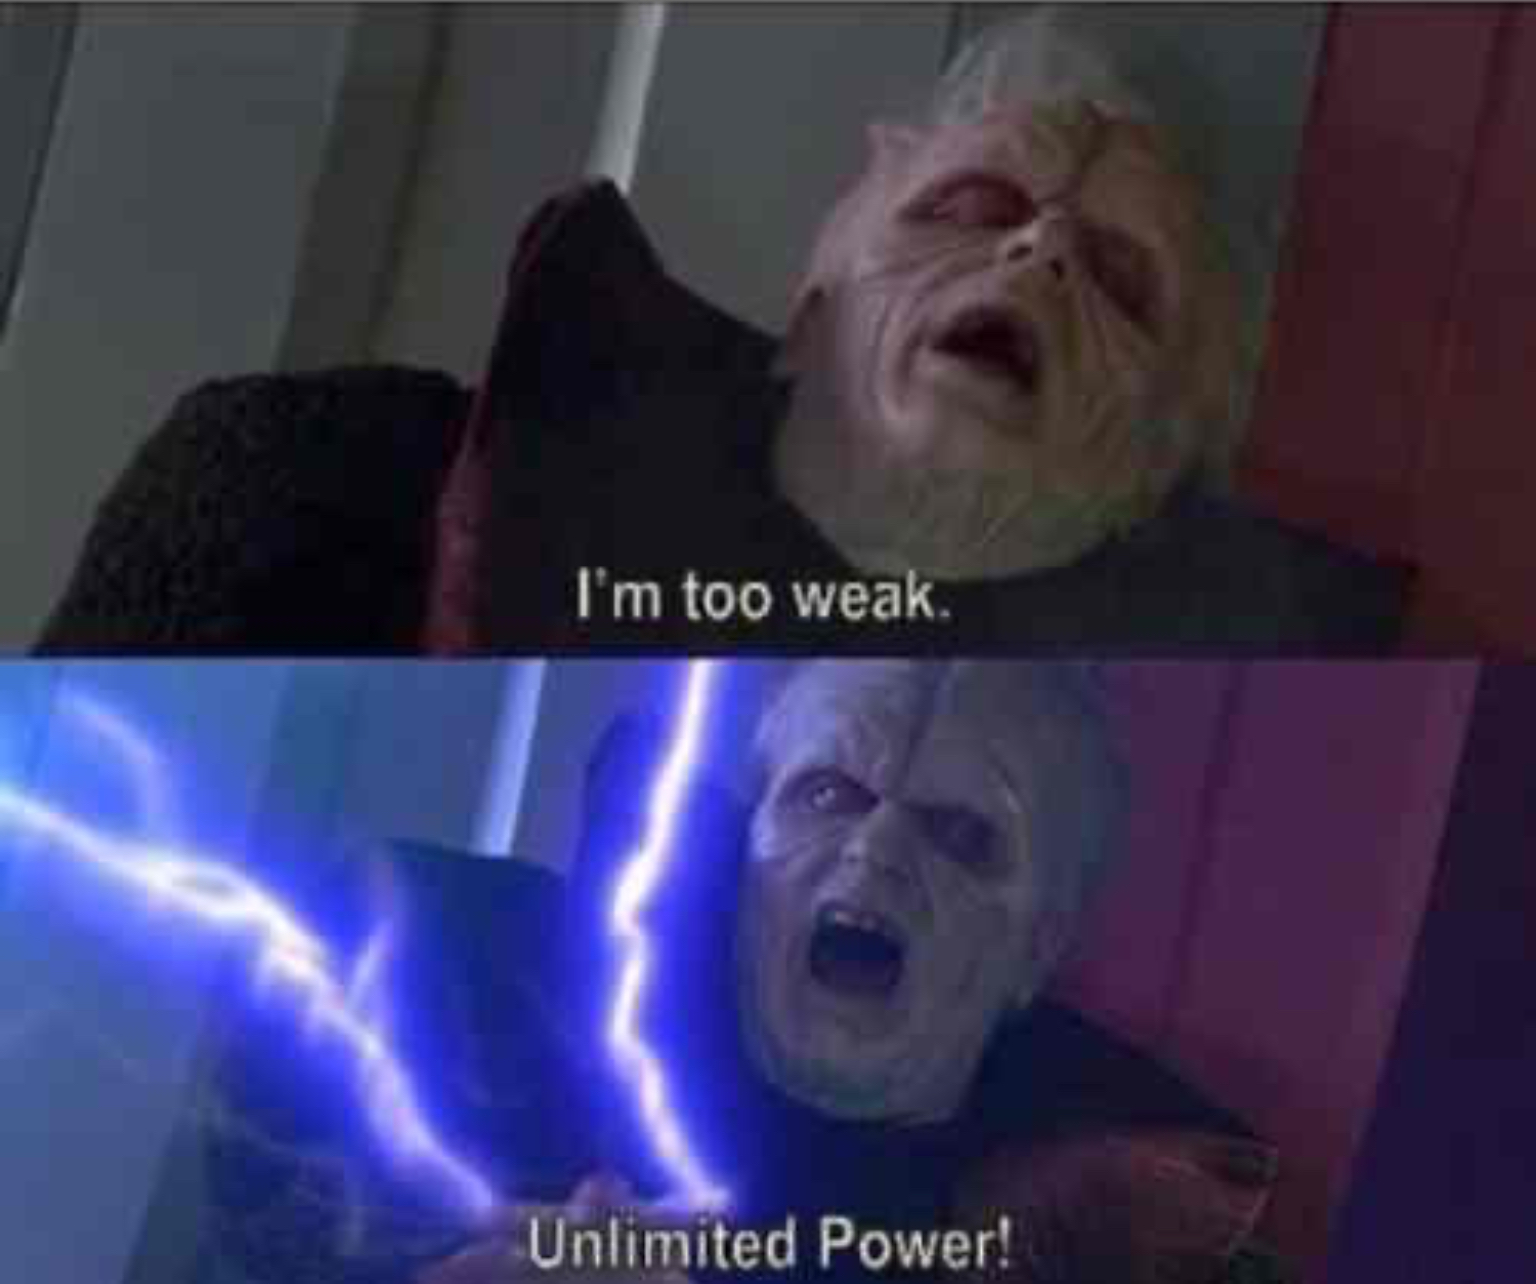 Unlimited Power Image